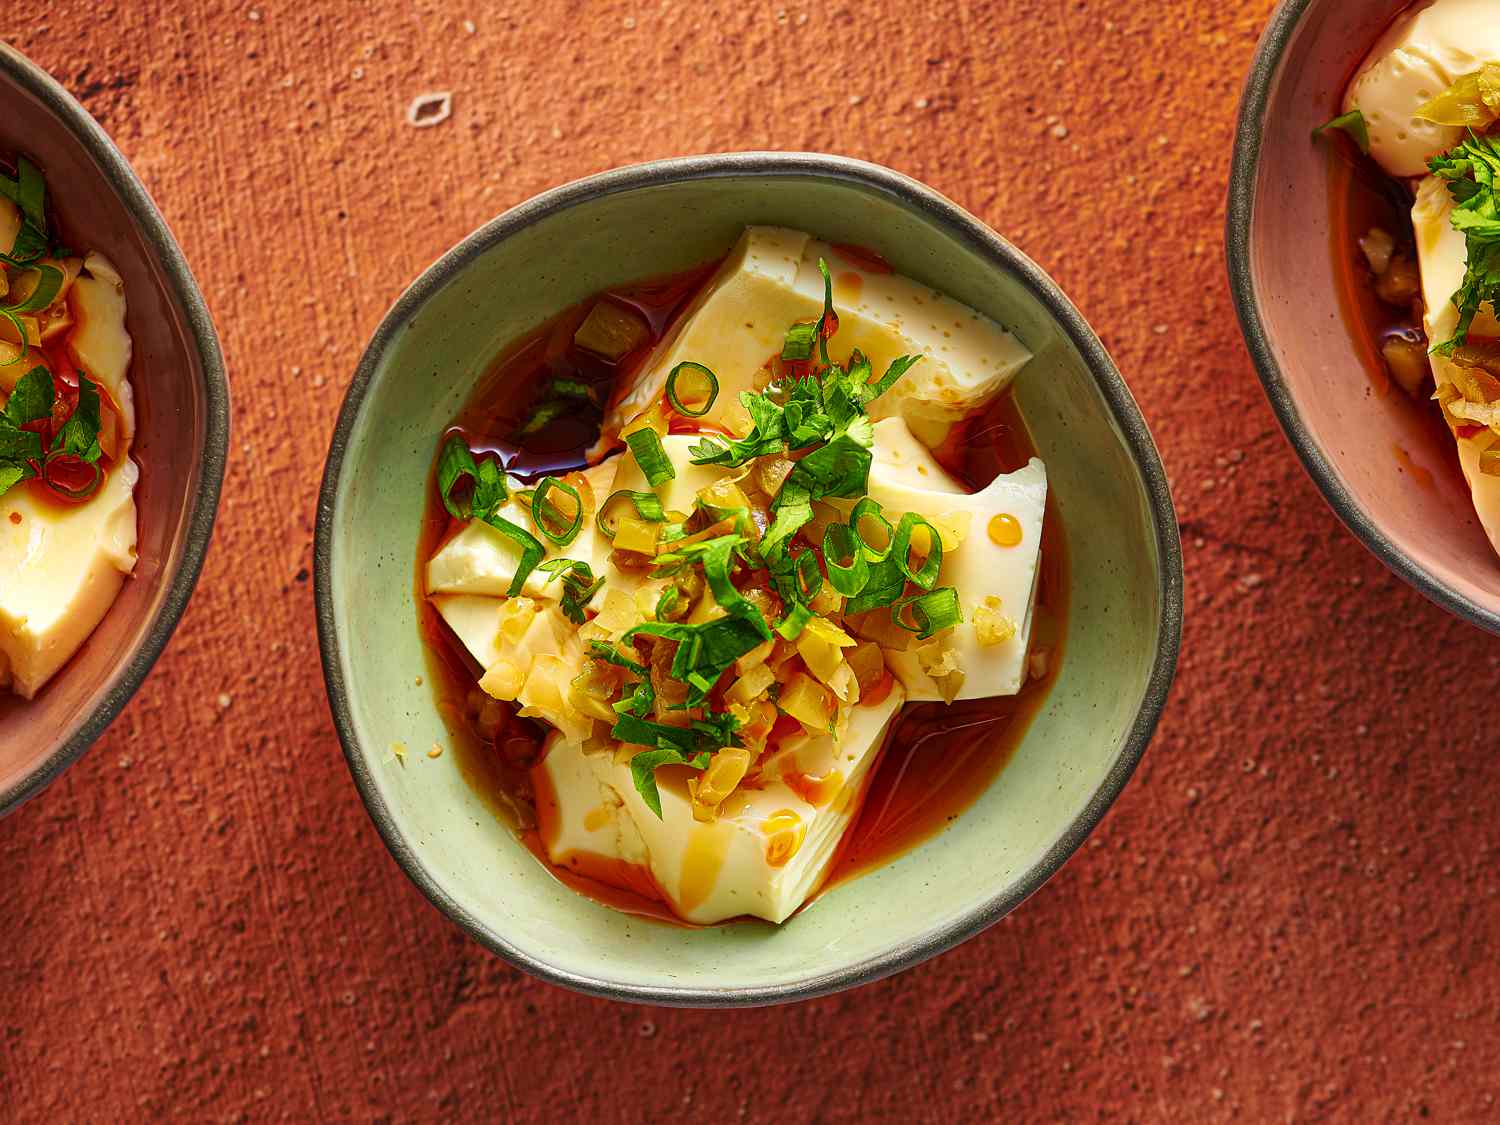 An irregularly round glazed ceramic bowl holding silken tofu with soy sauce and chili oil. There are two additional bowls, one on the right periphery of the image, one on the left periphery.